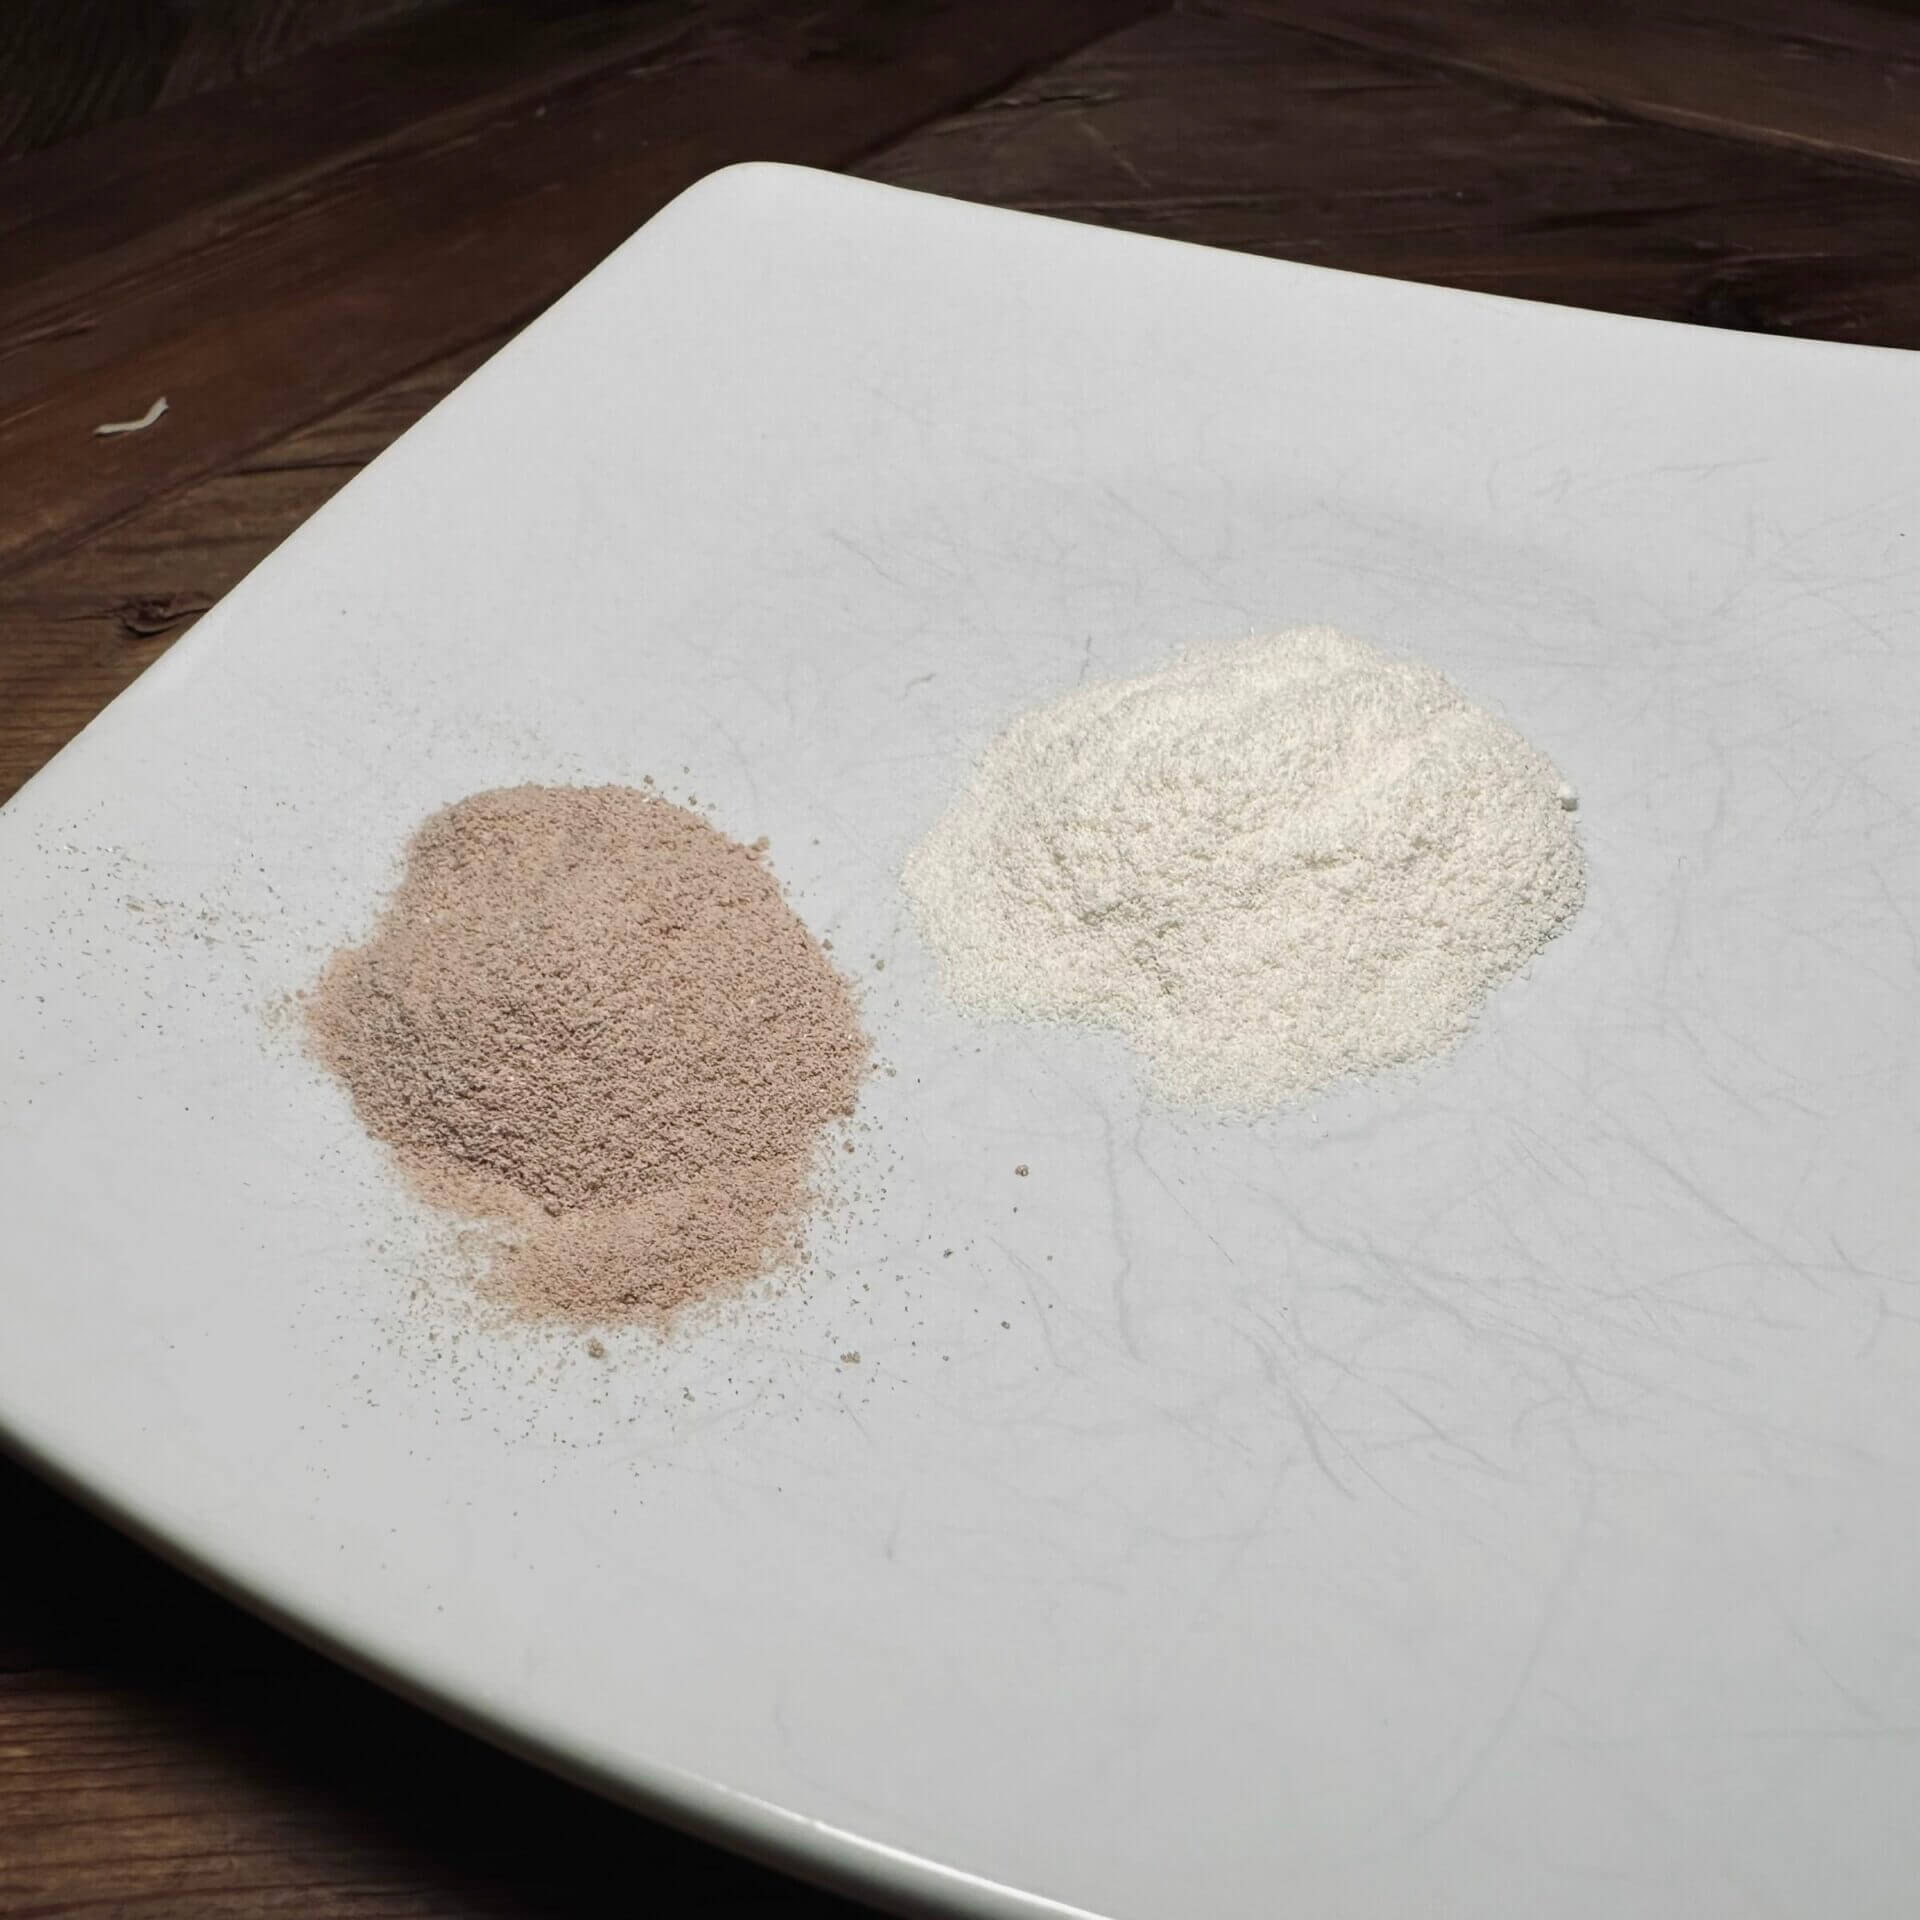 The powder of both flavors mix easily with water or milk and without clumping.